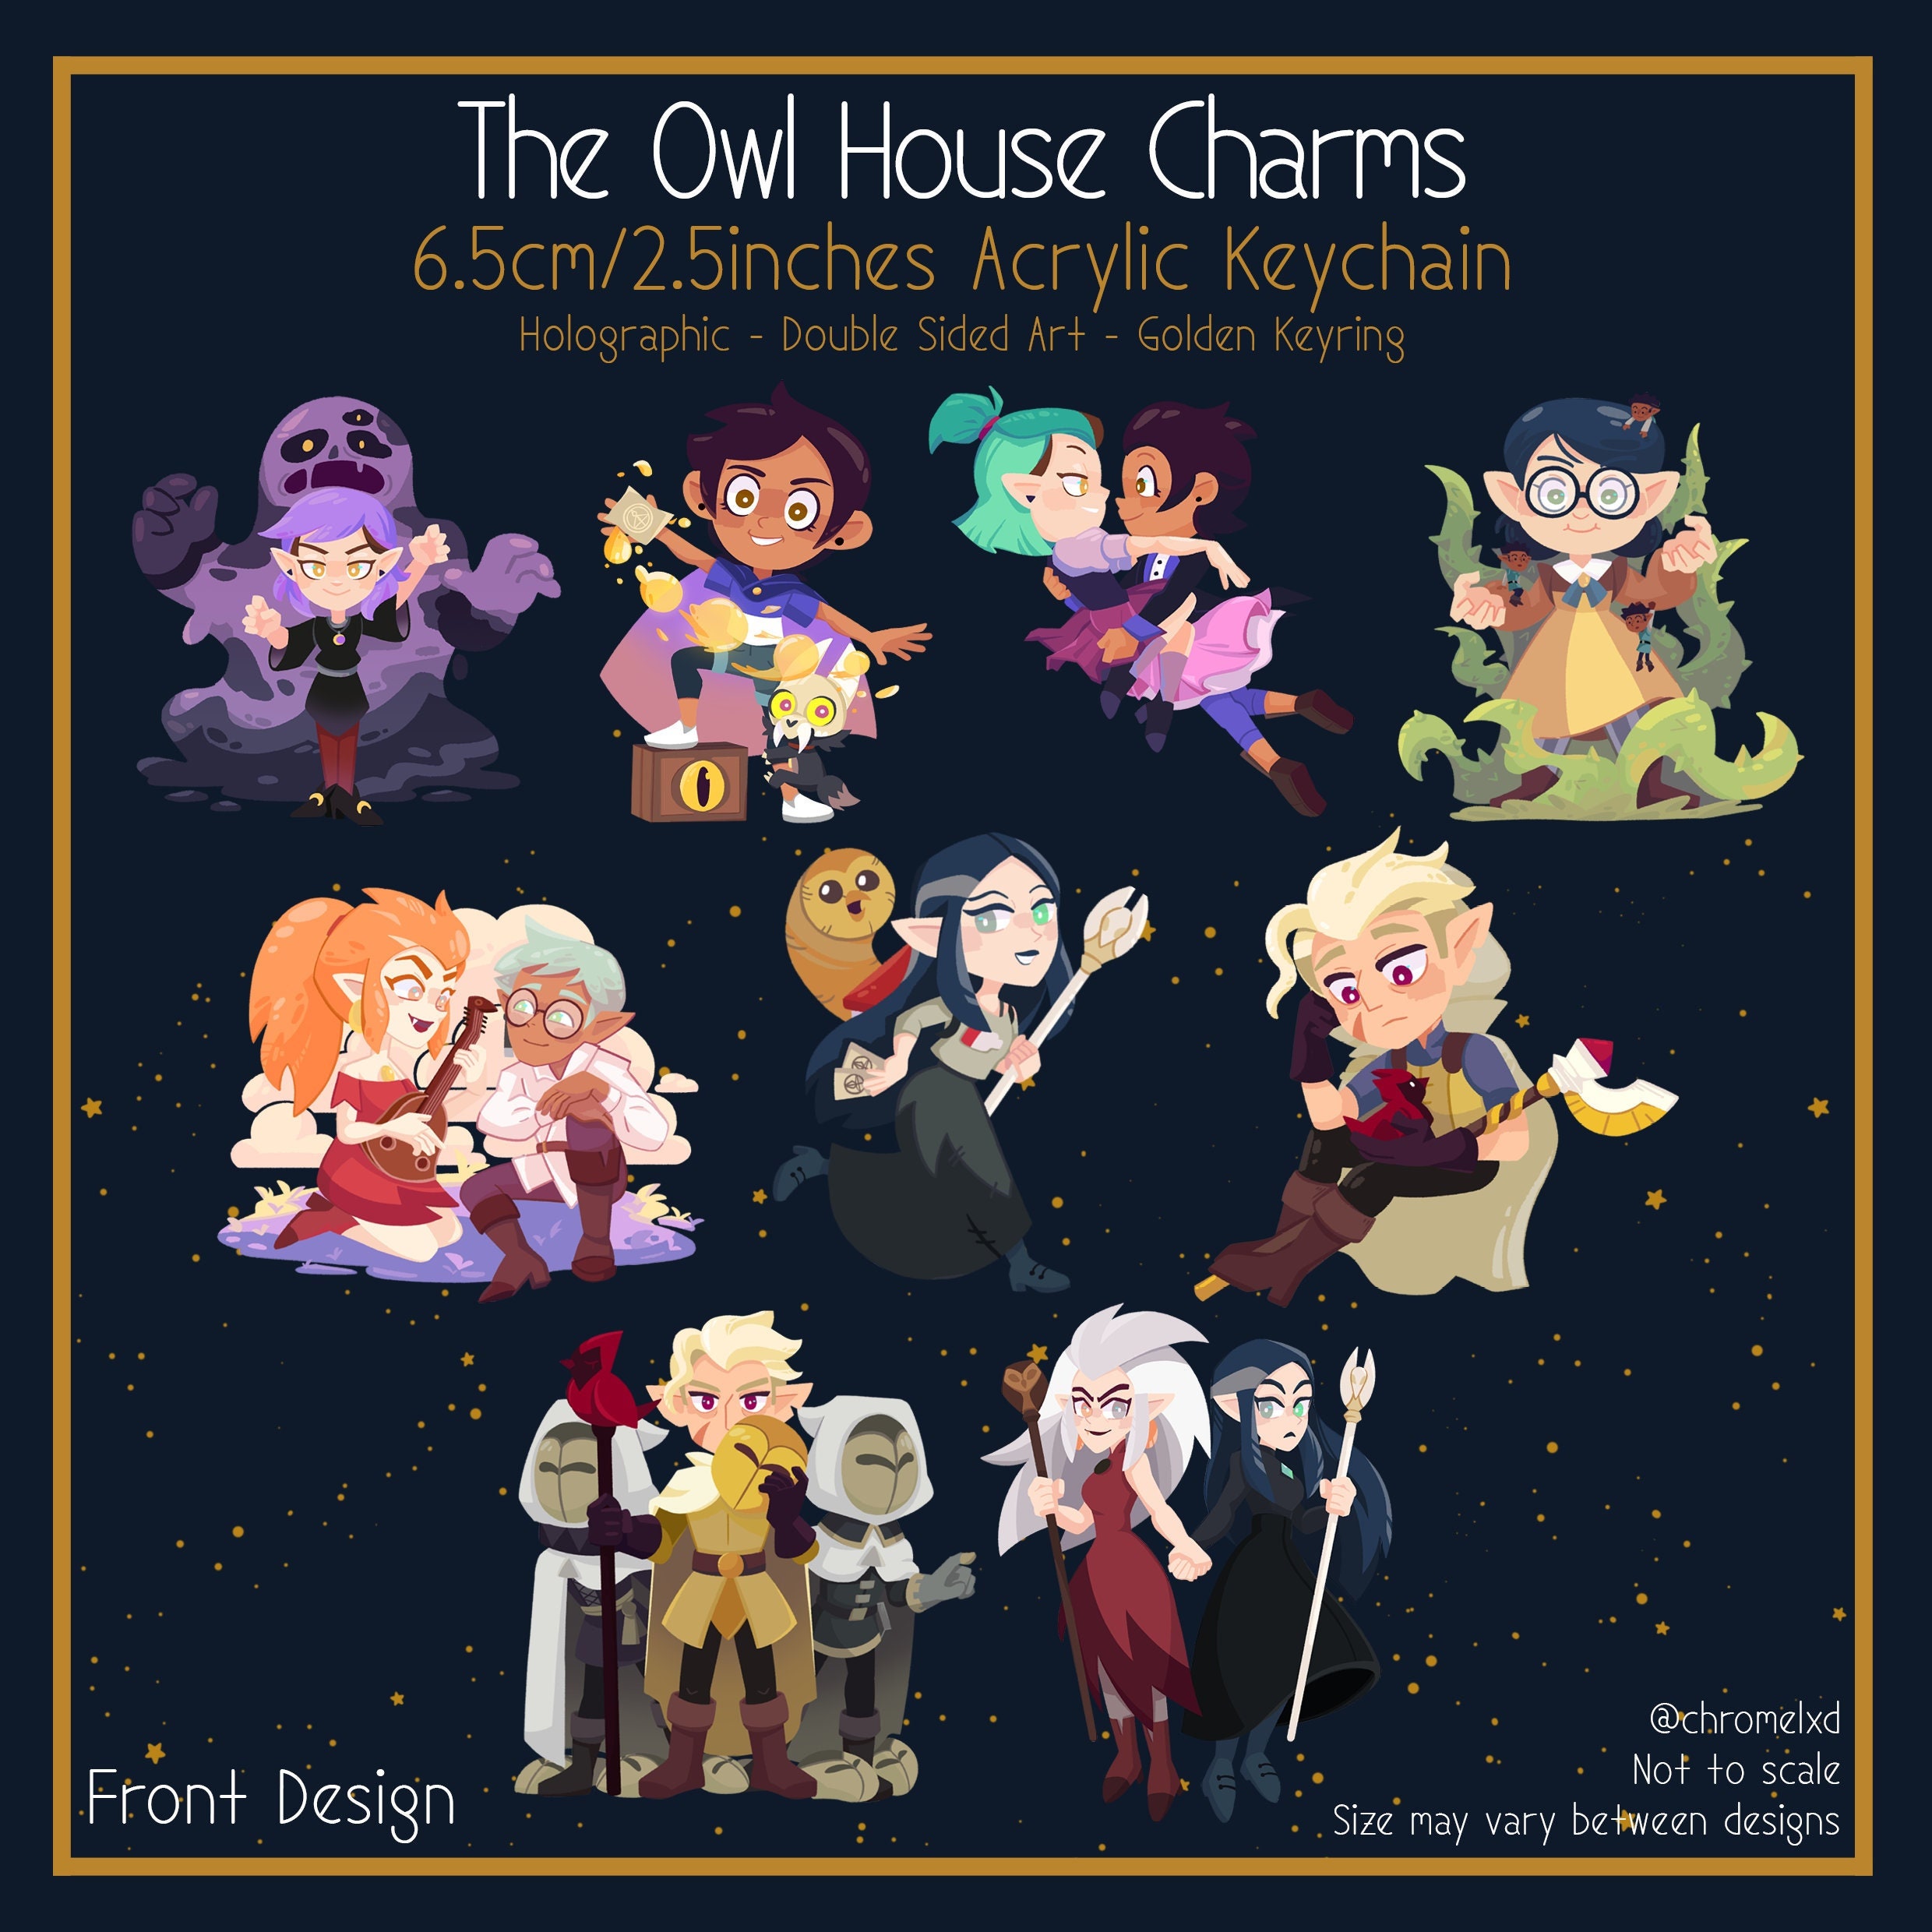 The owl house but in Gacha Club (give thoughts?)